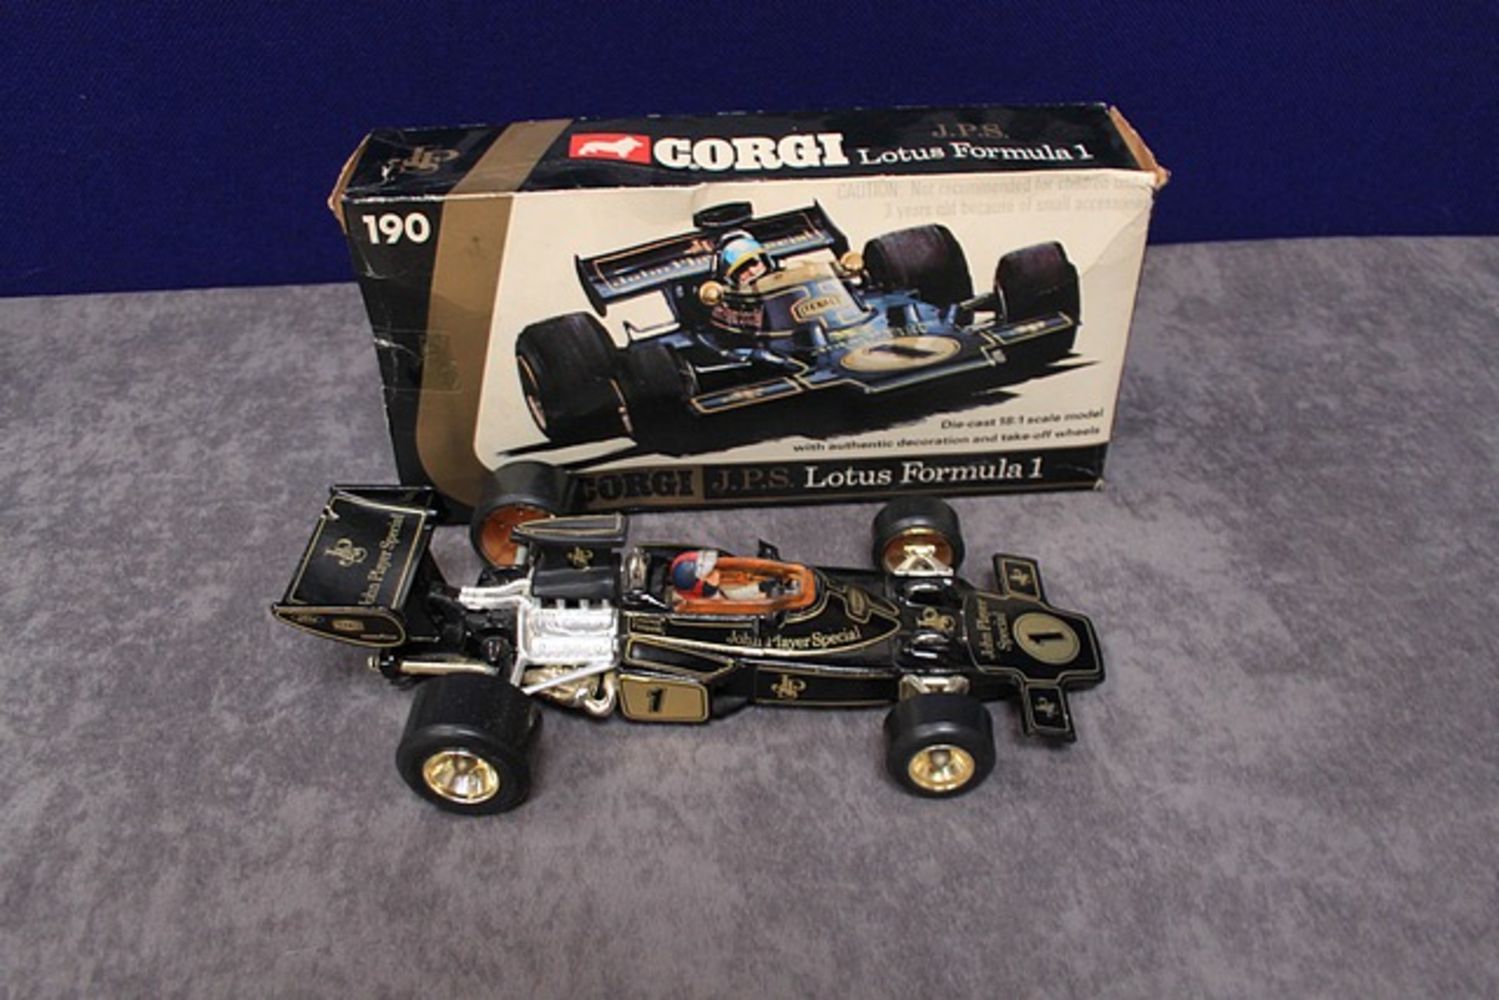 Vintage Toy Auction A Curated Collection From A Single User Over The Past 50 Years – Comprises Diecast, Corgi, Dinky, Soft Toys, Vintage Toys